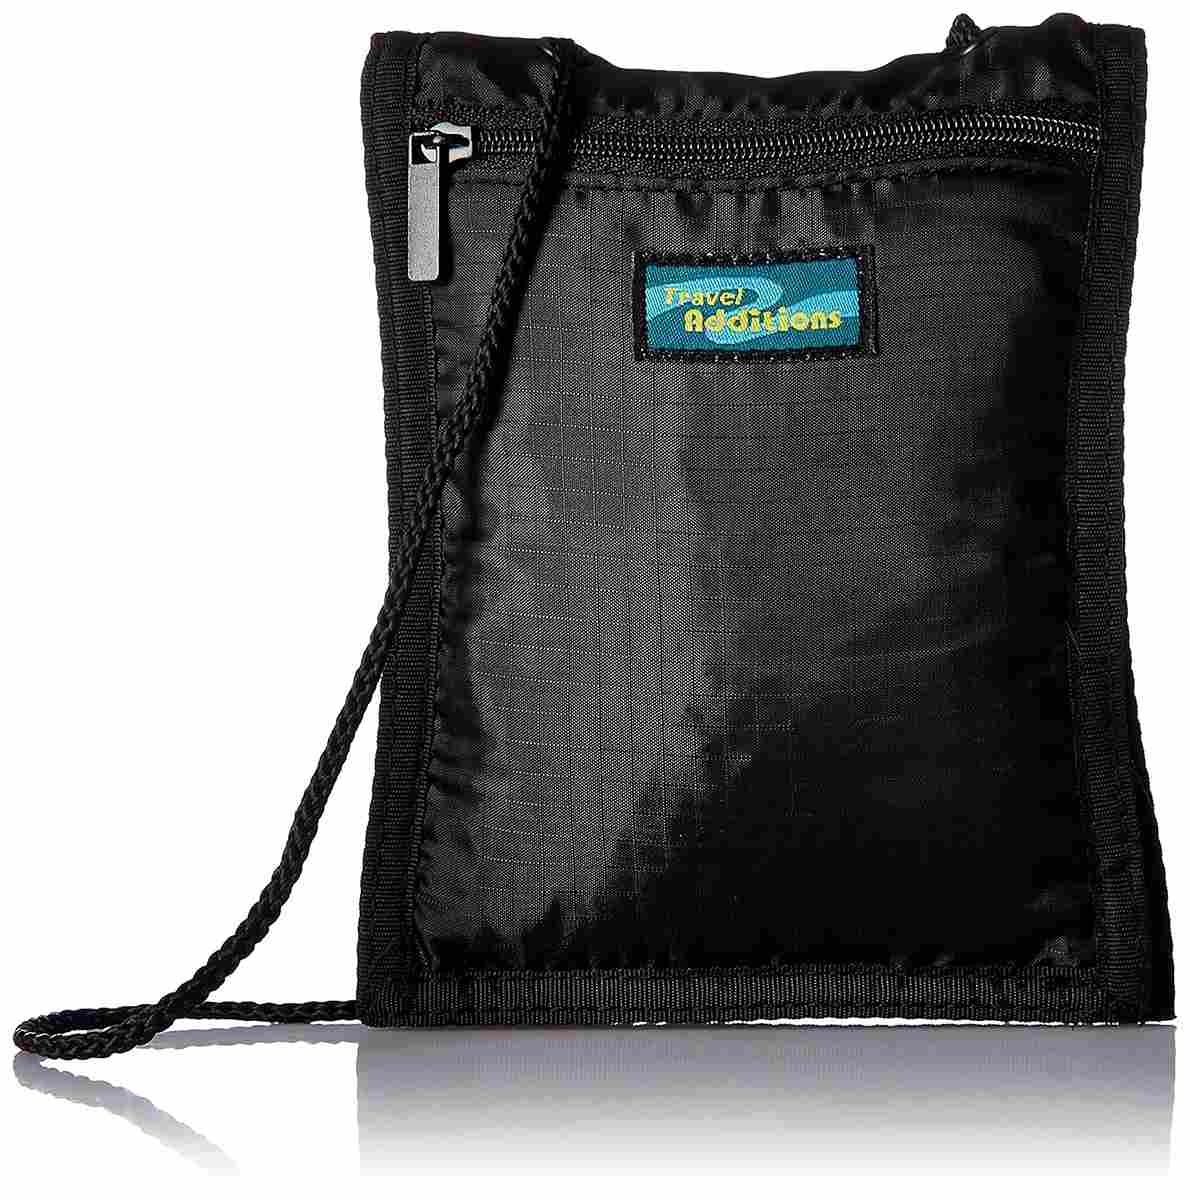 Black Travel Pouch: Keep essentials organized for any adventure (mention size if relevant). Perfect for storing tech, toiletries, or anything in between. Ensure your essentials are protected and easily accessible.